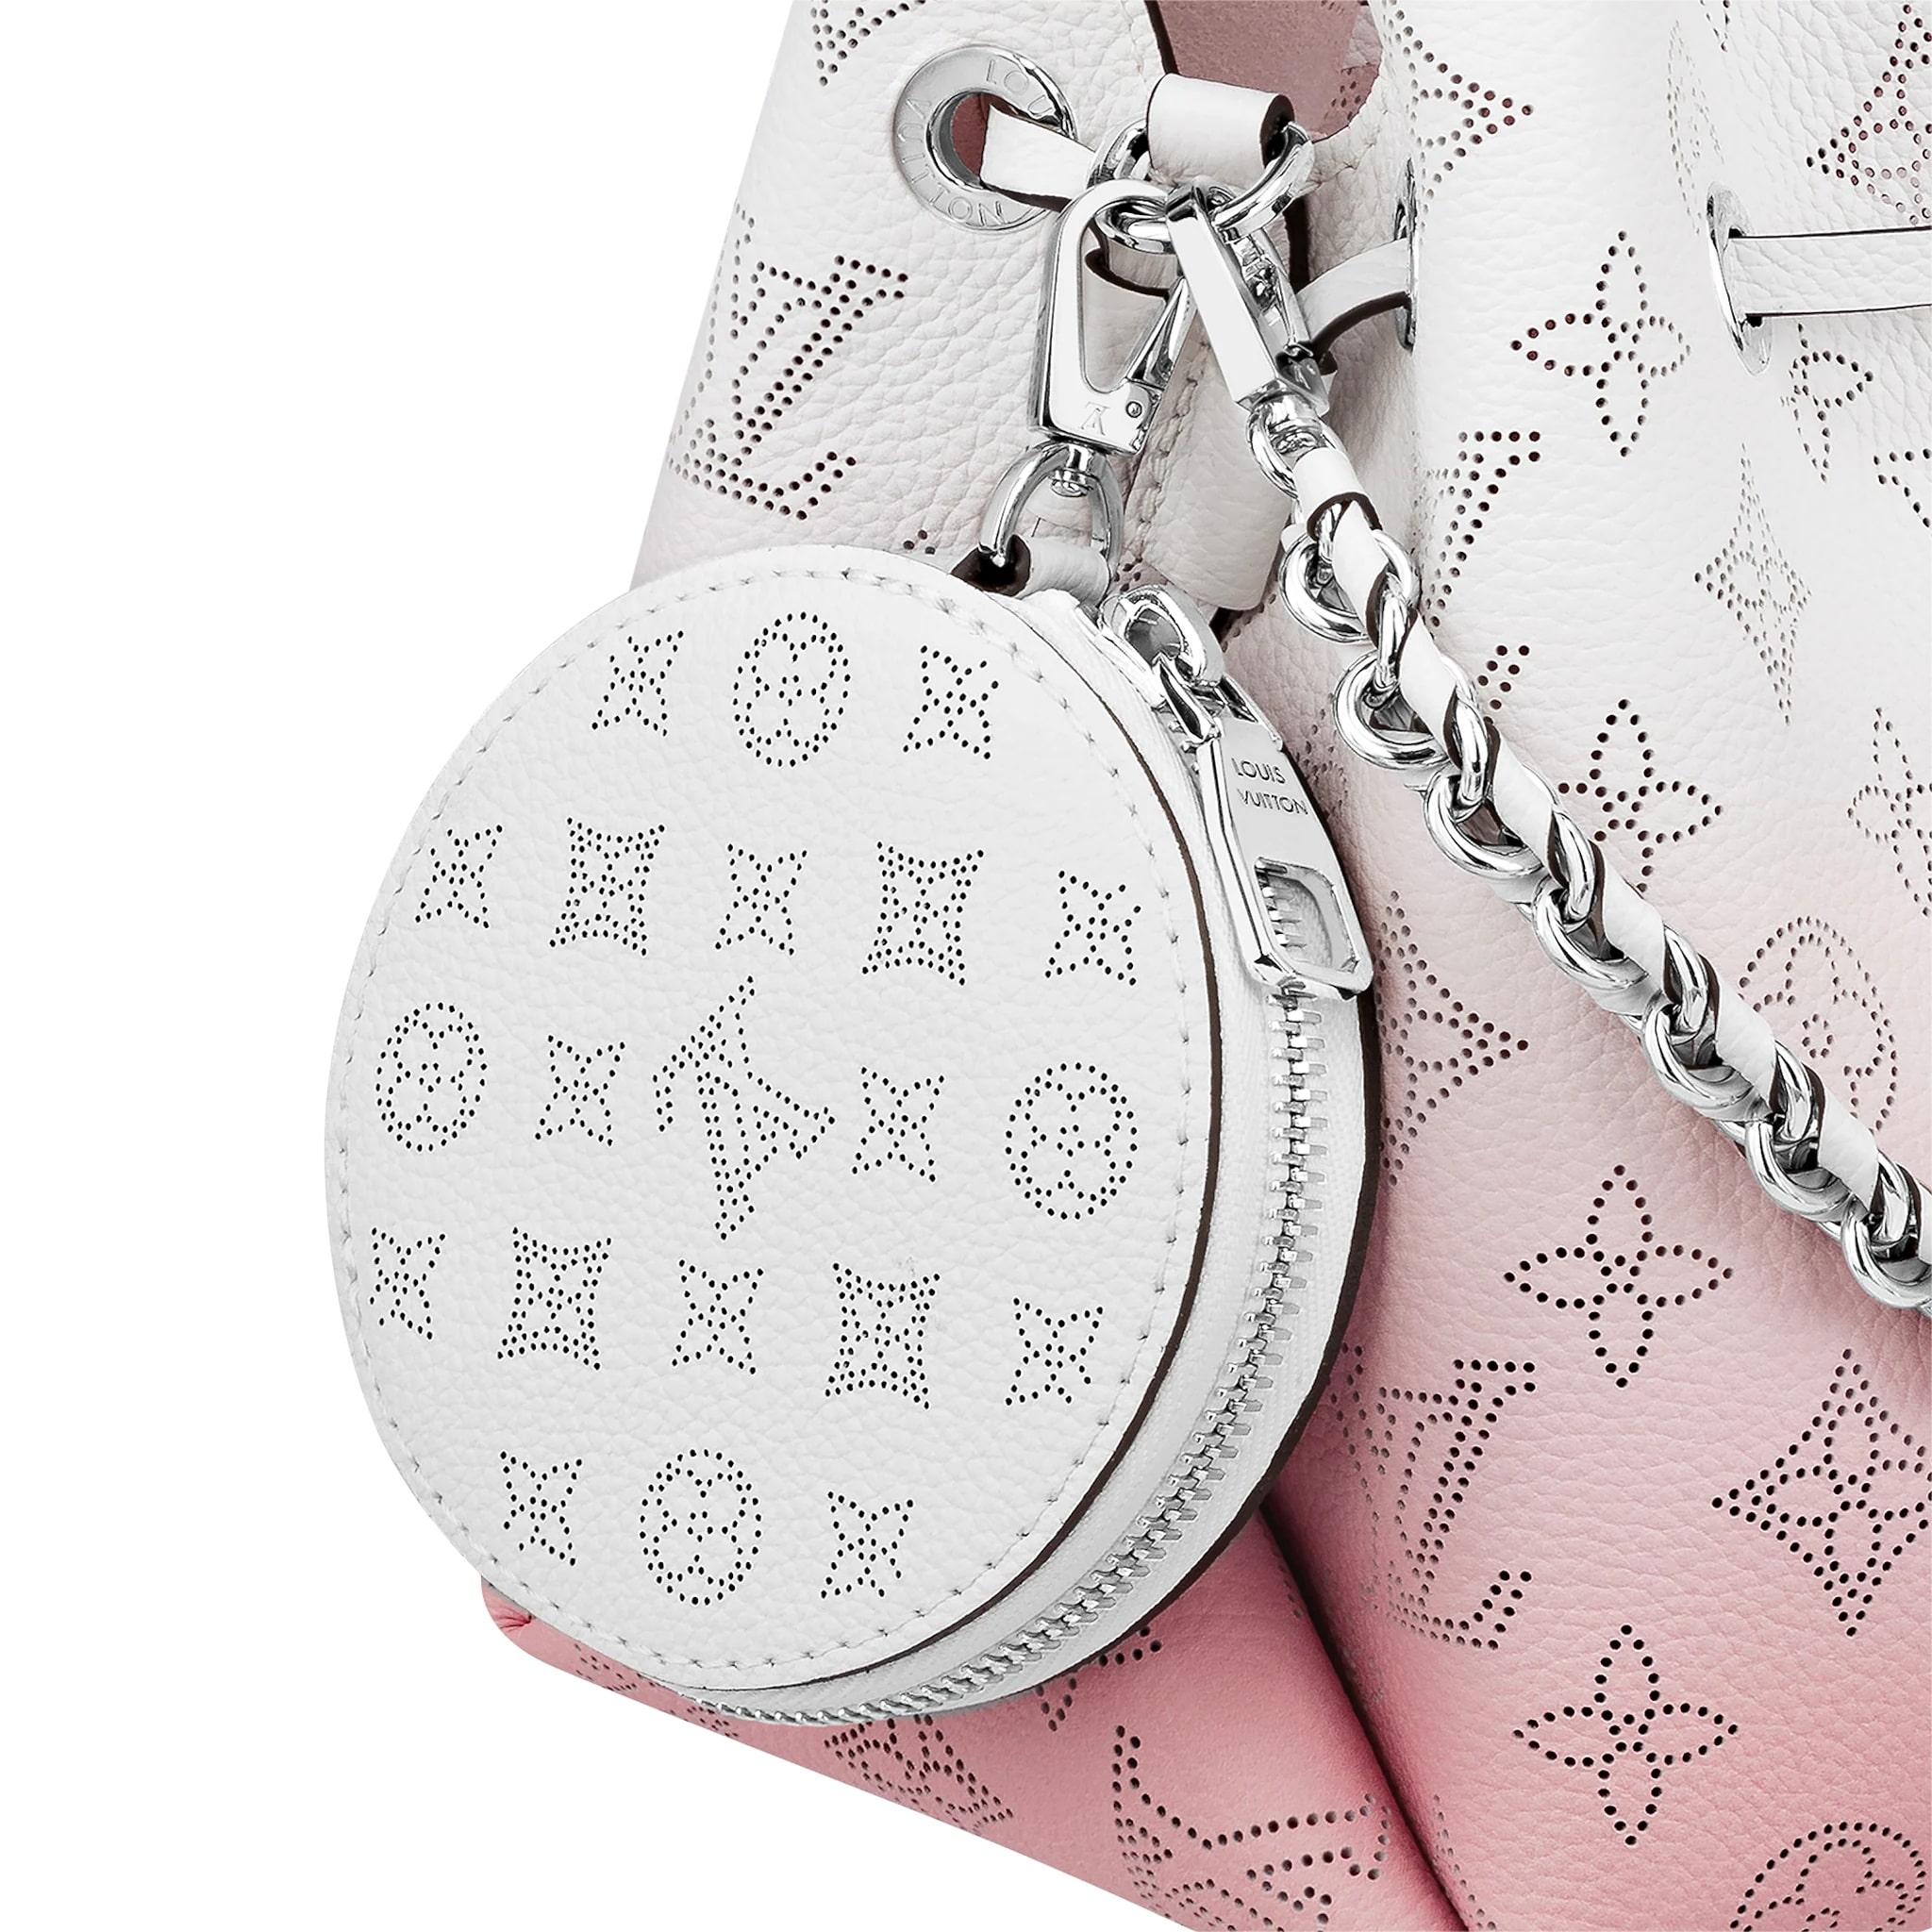 Louis Vuitton's Mahina Collection Re-Imagined - Spotted Fashion